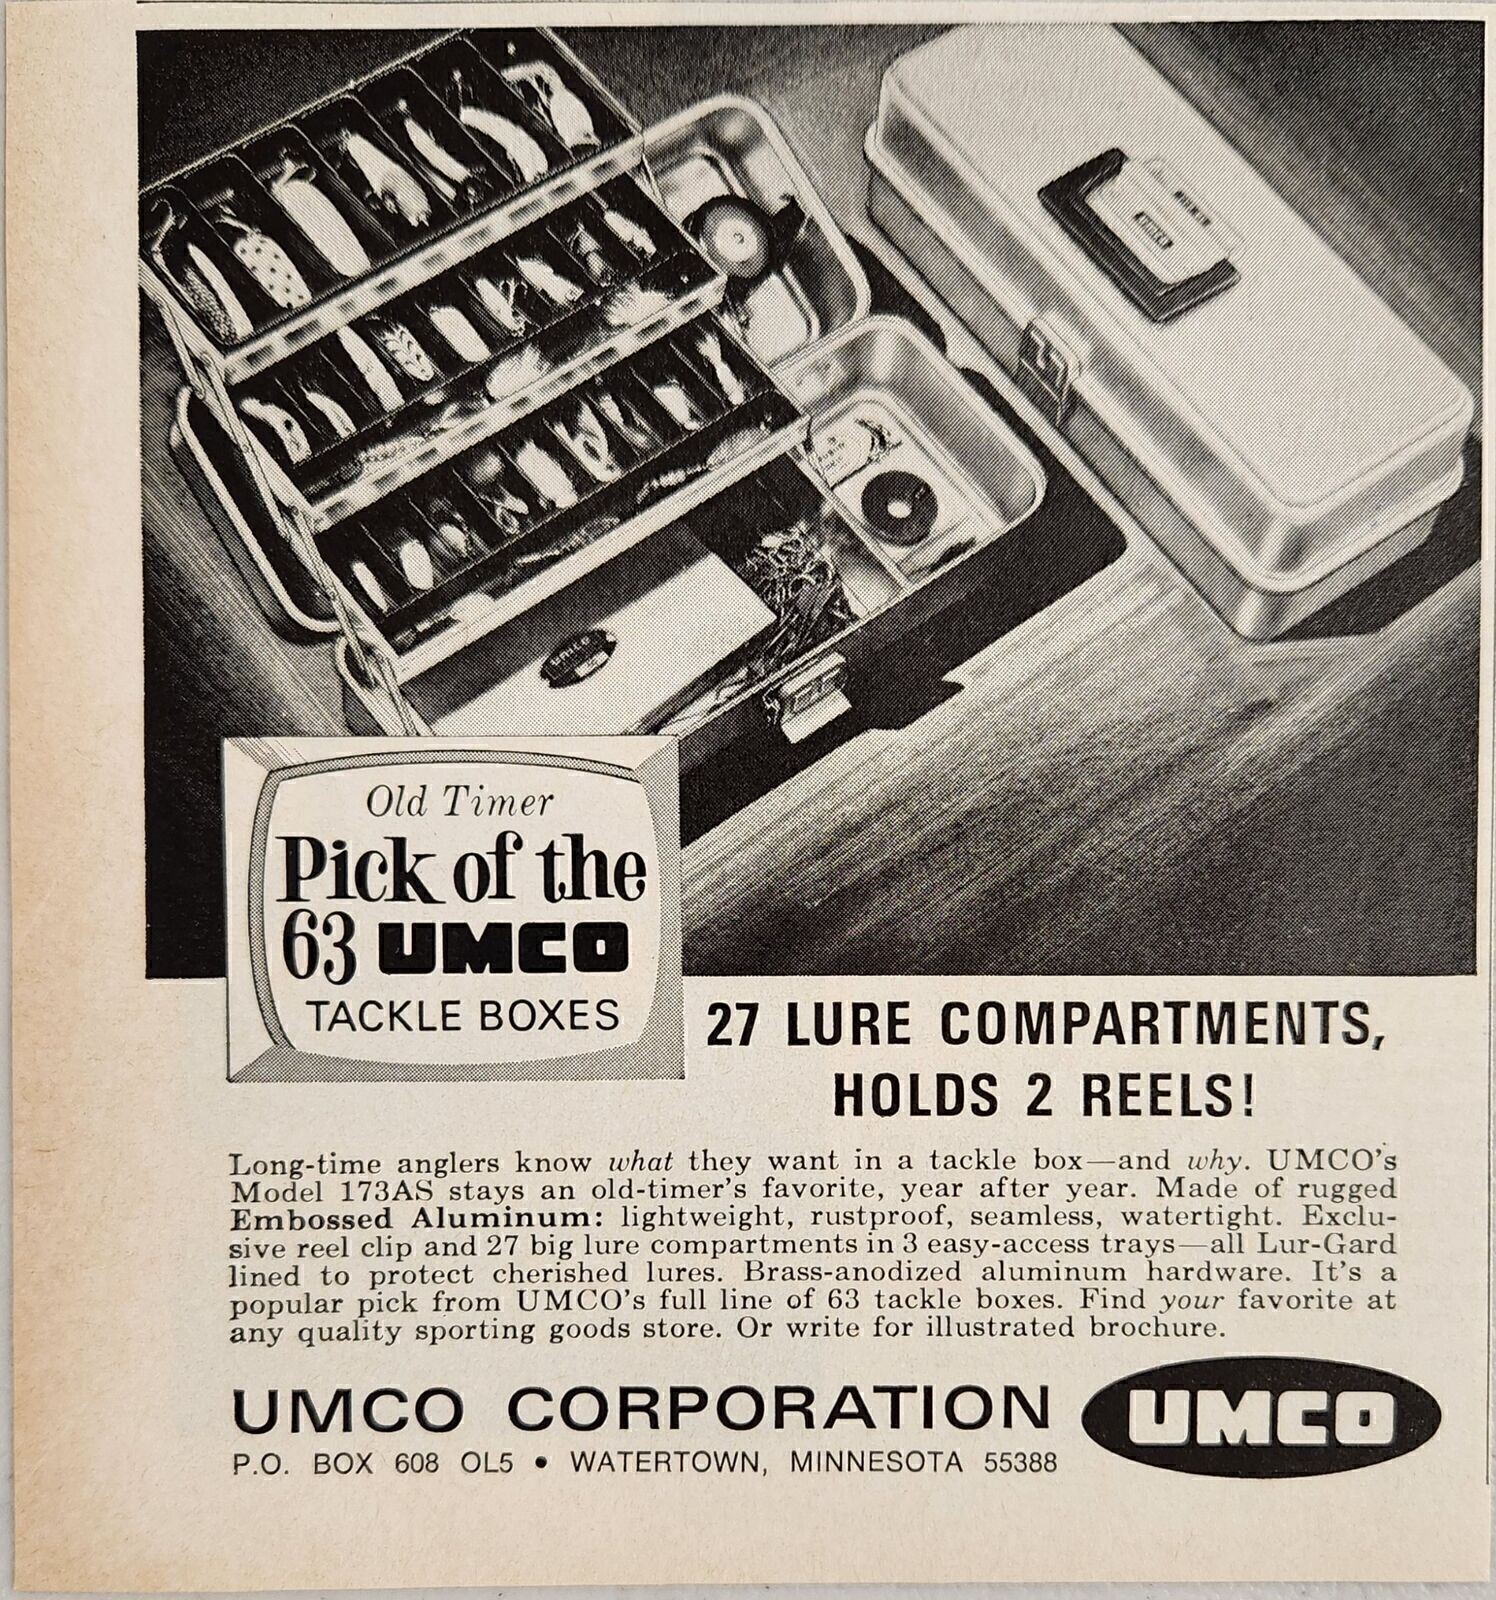 1968 Print Ad UMCO Fishing Tackle Boxes Holds 2 Reels Watertown,Minnesota